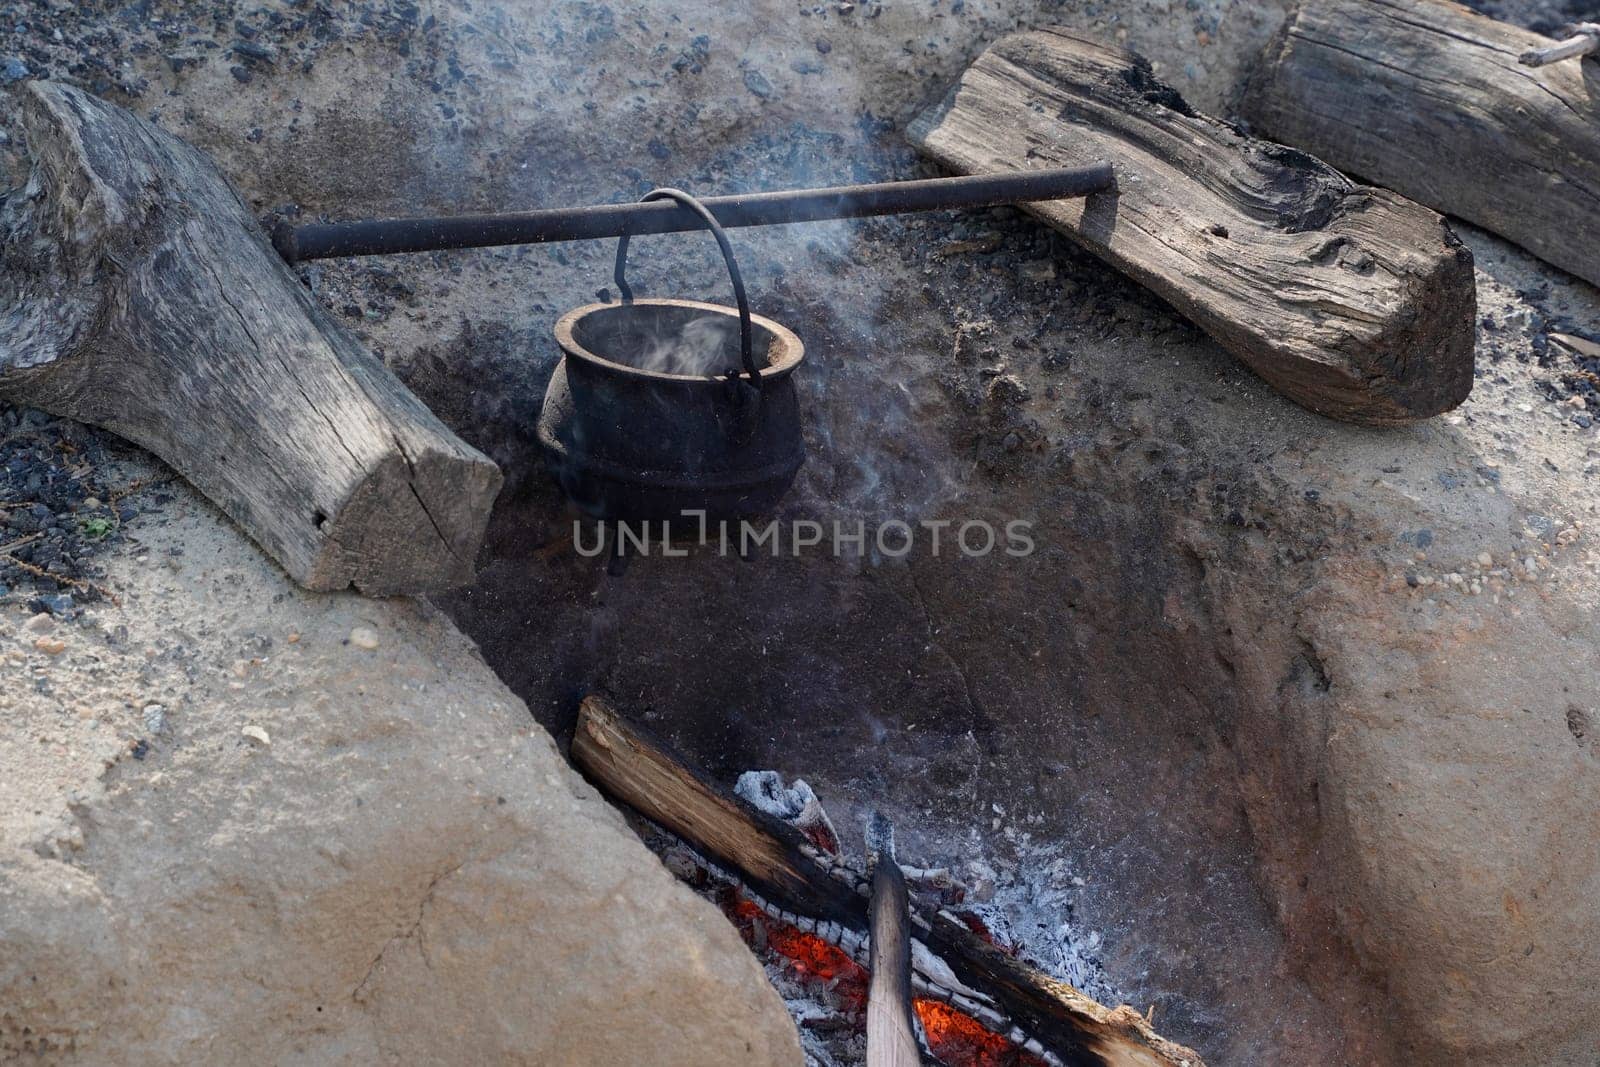 Water boiling on fire in camp of American Revolution british soldier settler in Yorktown, Virginia USA